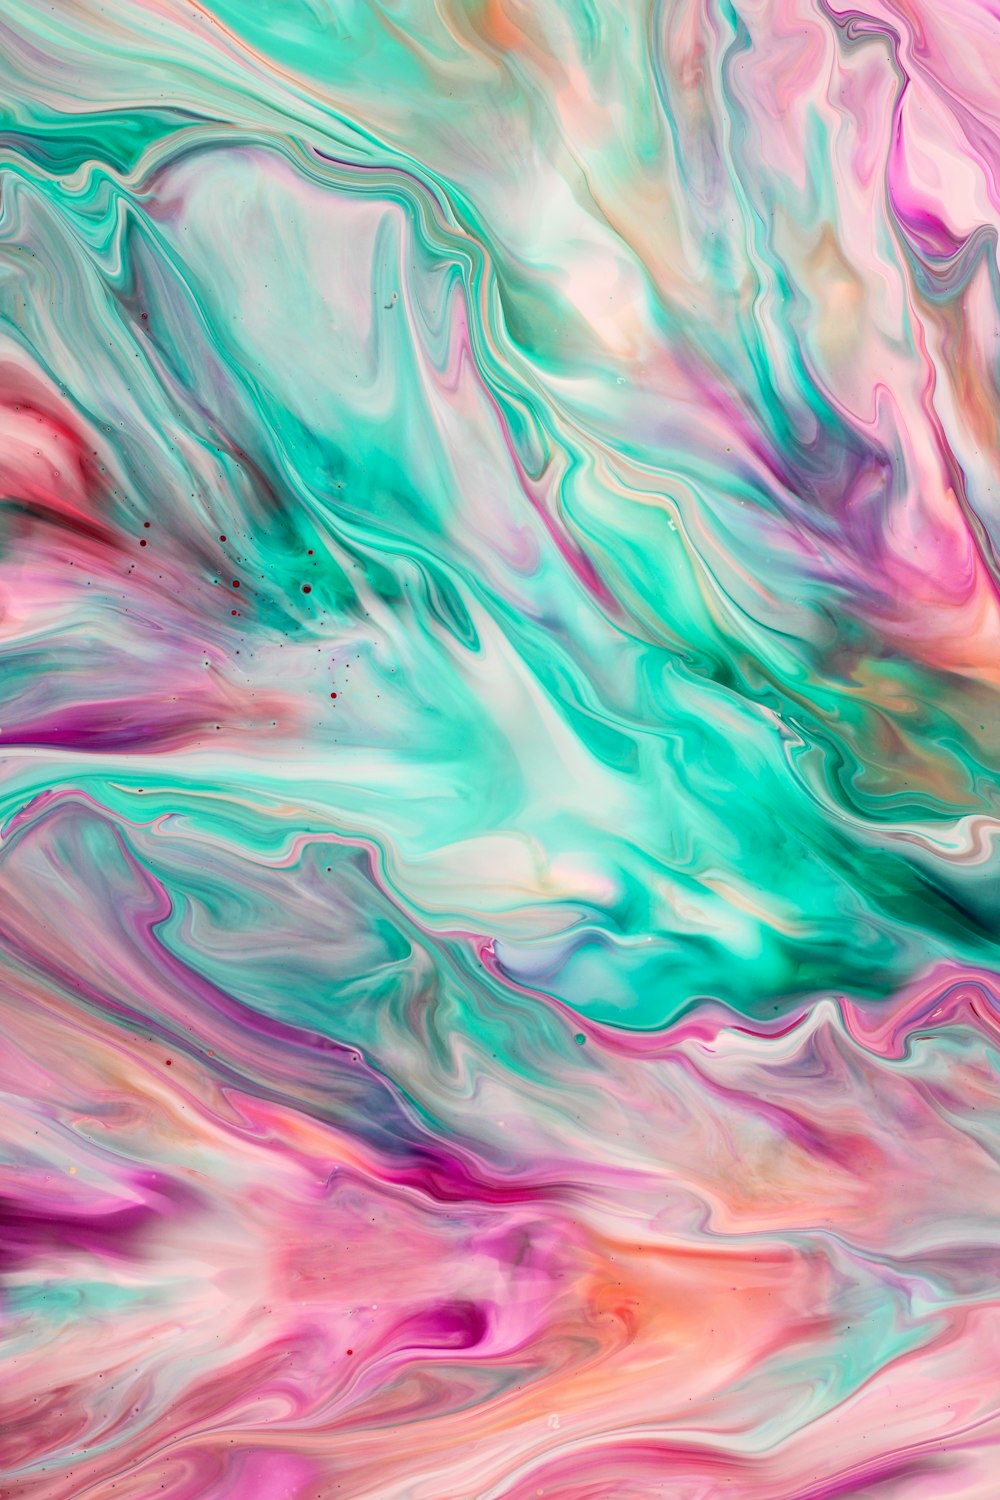 an abstract painting with pink, blue, and green colors